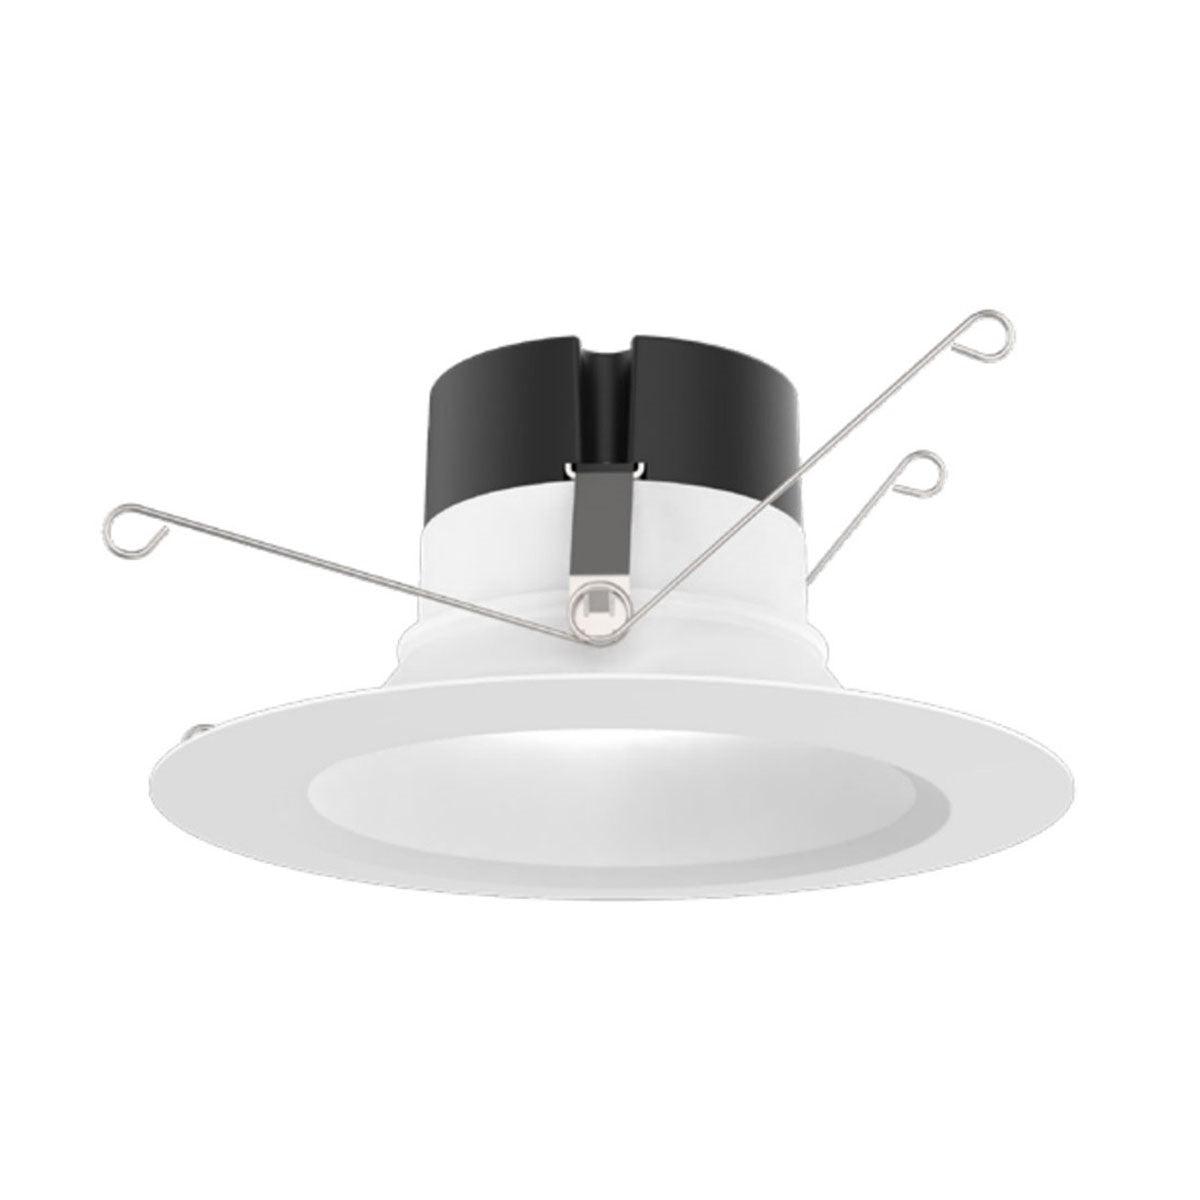 6 Inch Recessed LED Can Light, Round, 10 Watt, 900 Lumens, Selectable CCT, 2700K to 5000K, Smooth Trim - Bees Lighting